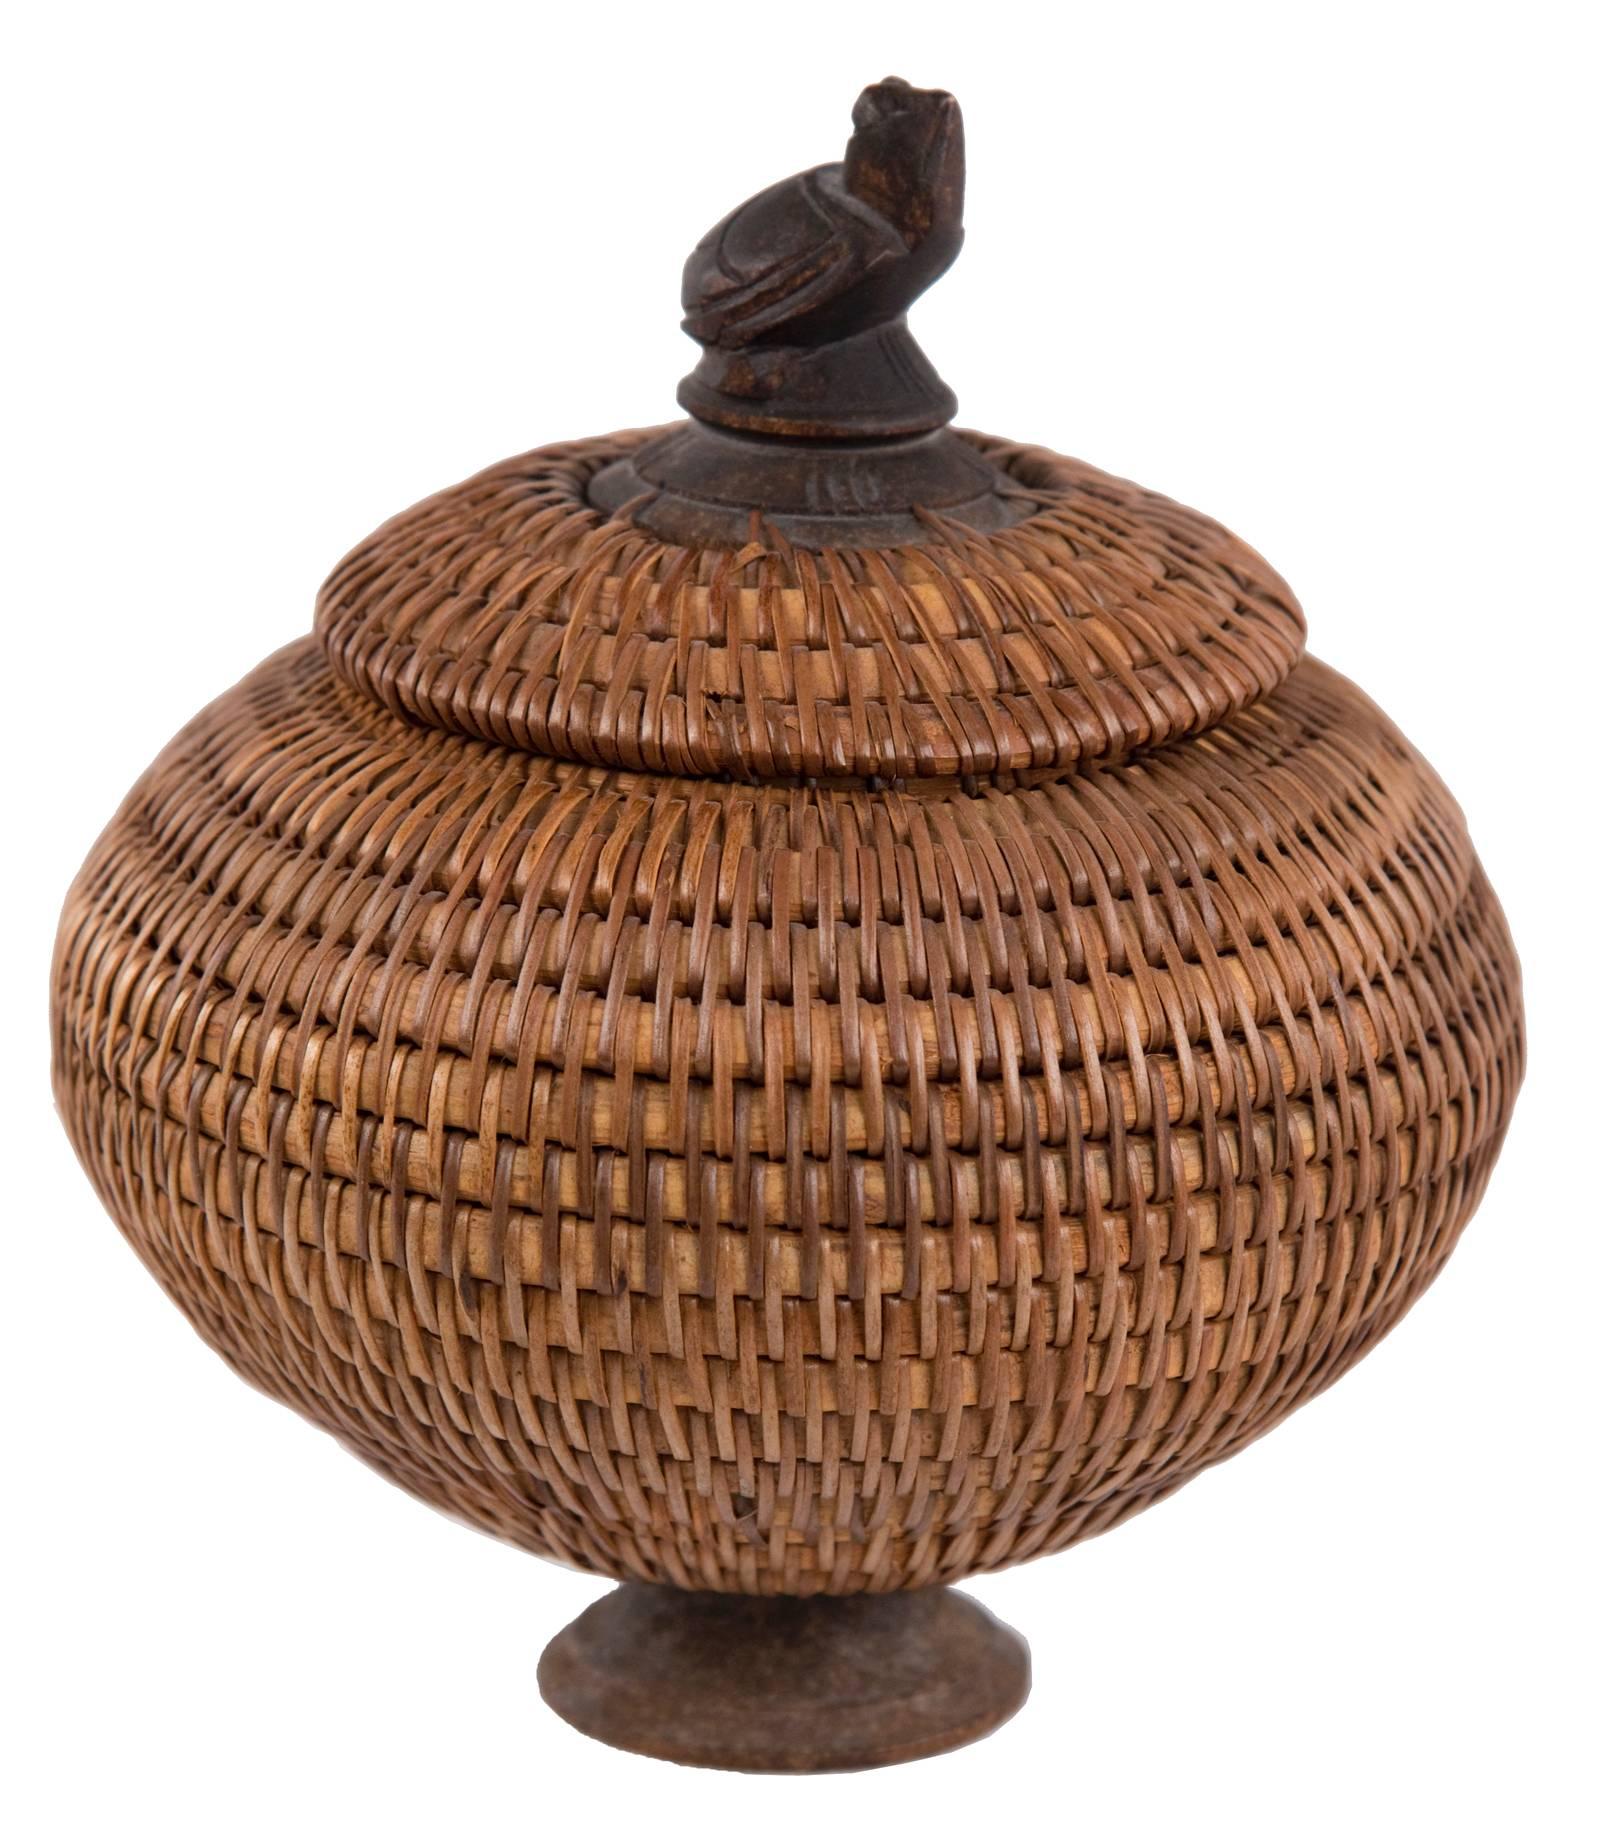 A tightly woven vessel of ovoid form on a wooden circular base and topped with a woven lid with a decorative carved turtle finial.